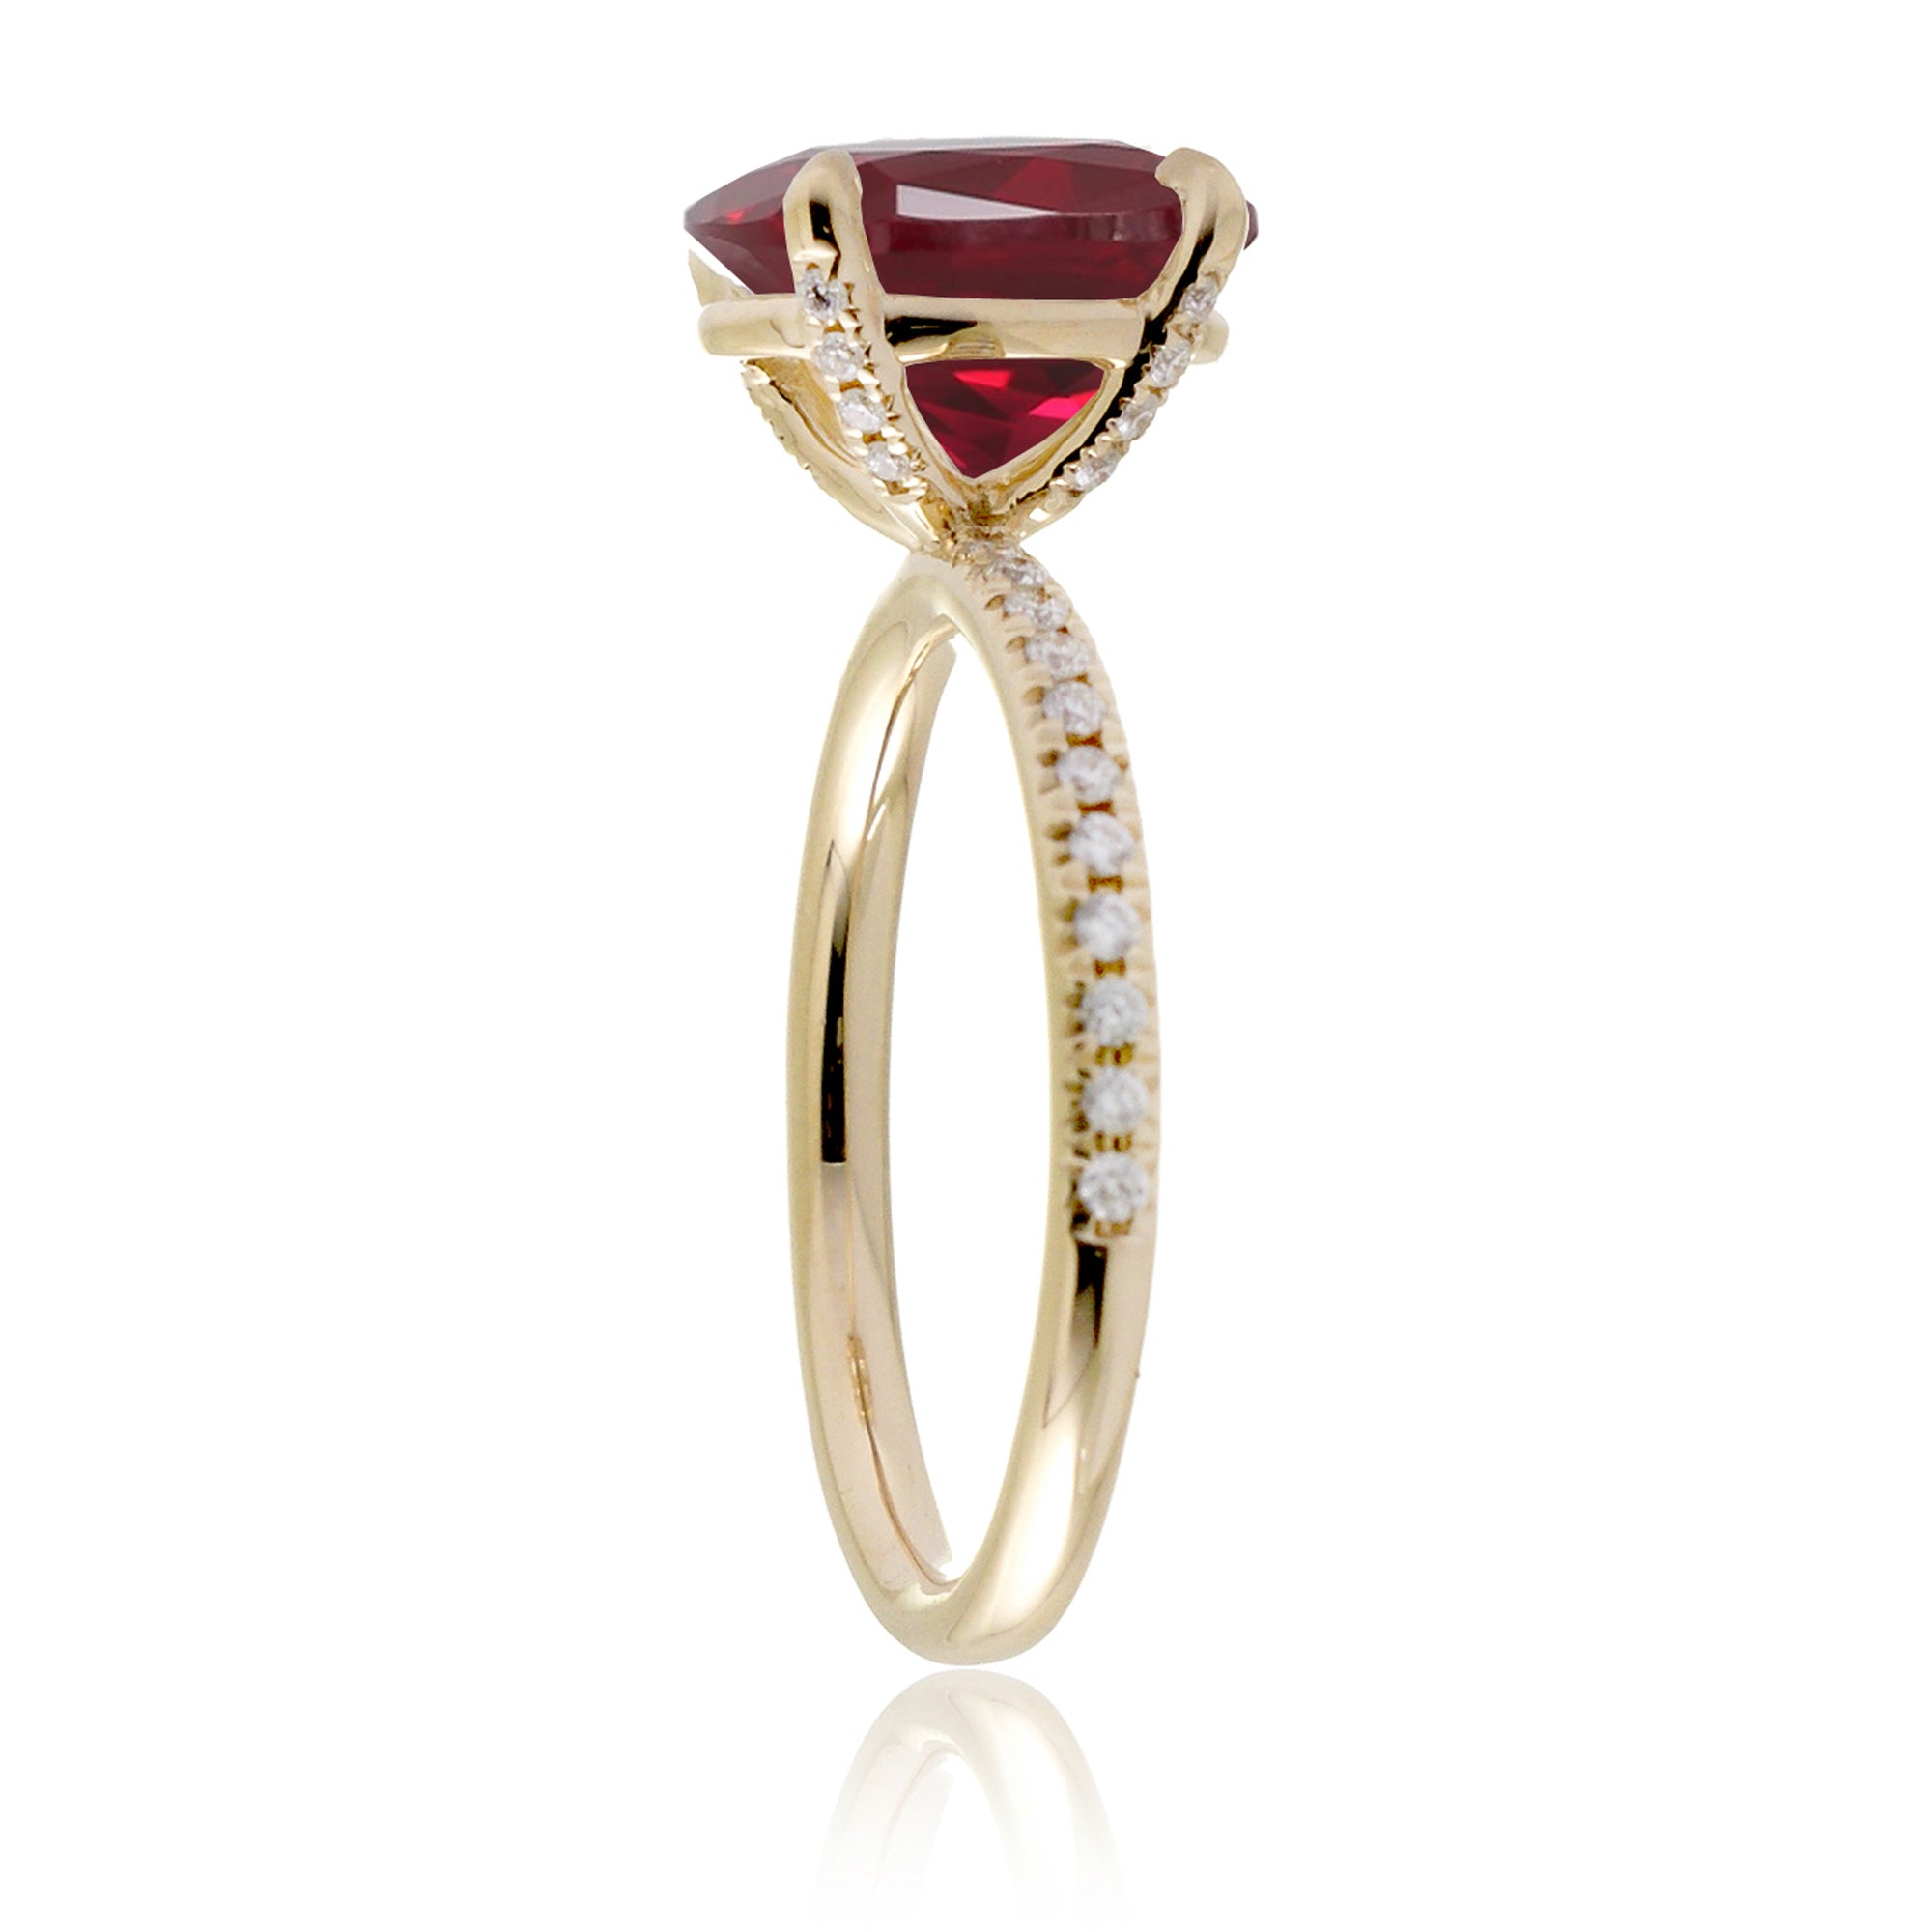 Oval lab-grown ruby diamond band engagement ring yellow gold - the Ava